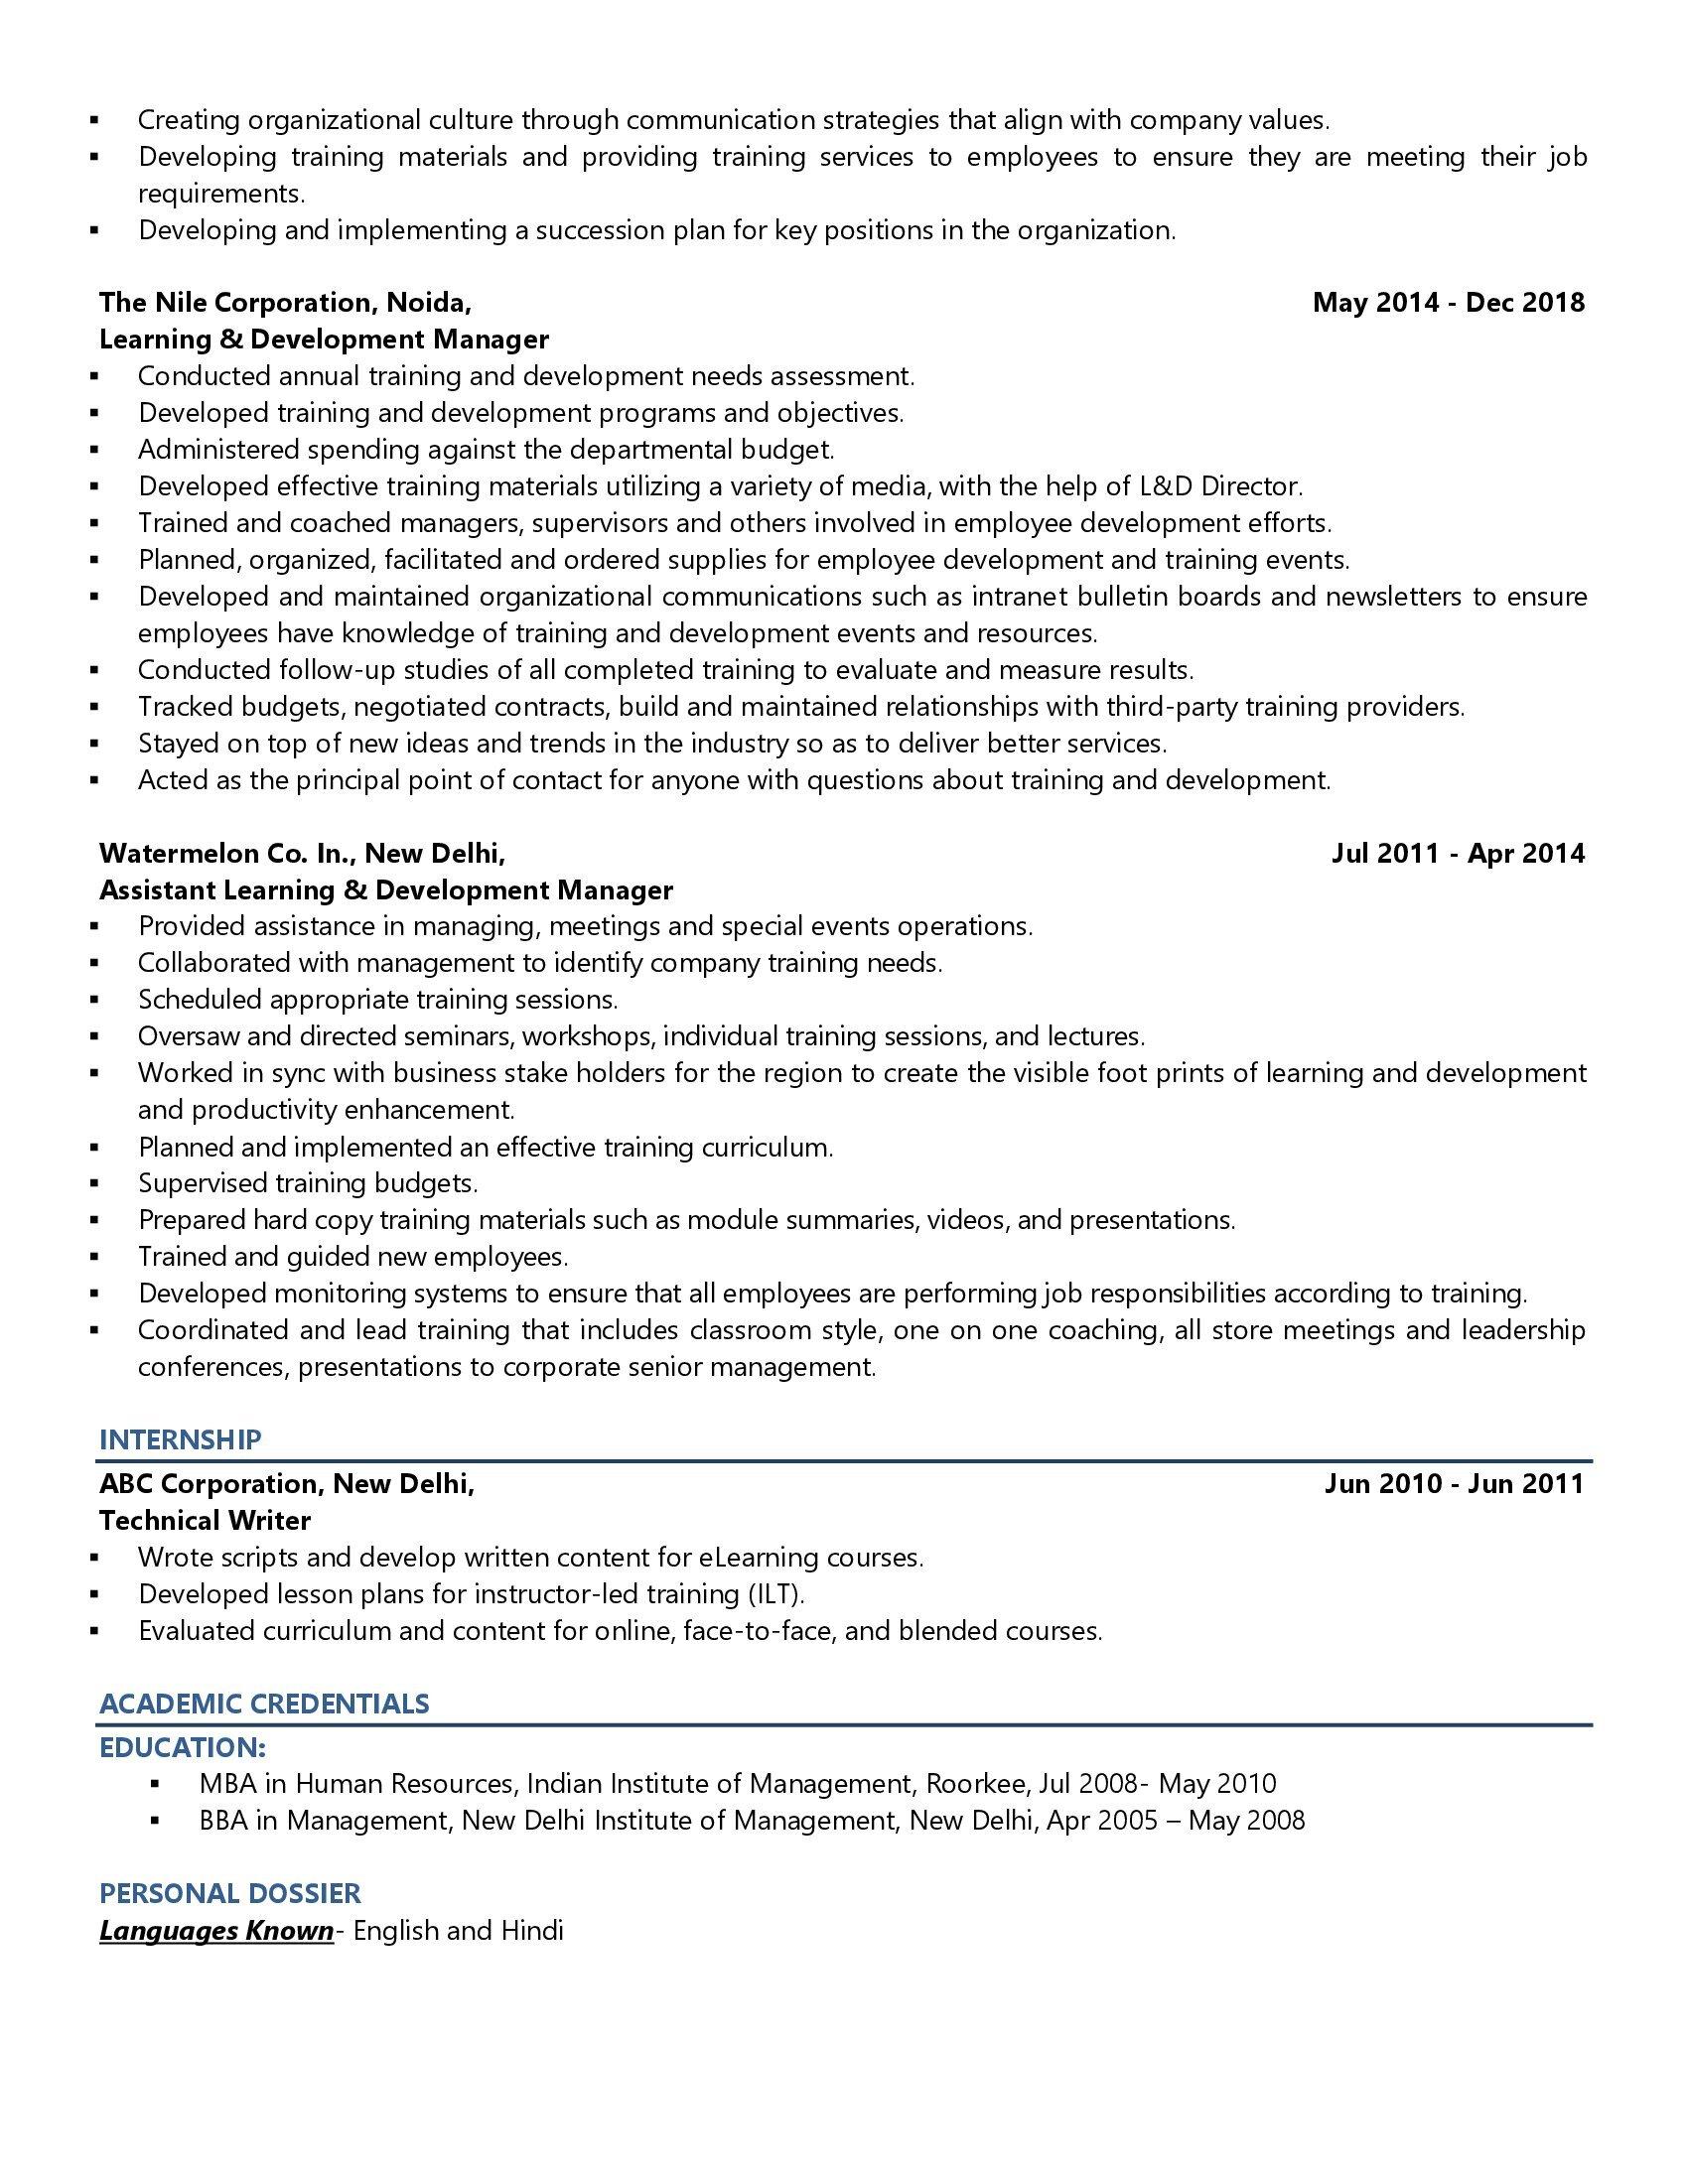 Learning & Development (L&D) Director - Resume Example & Template